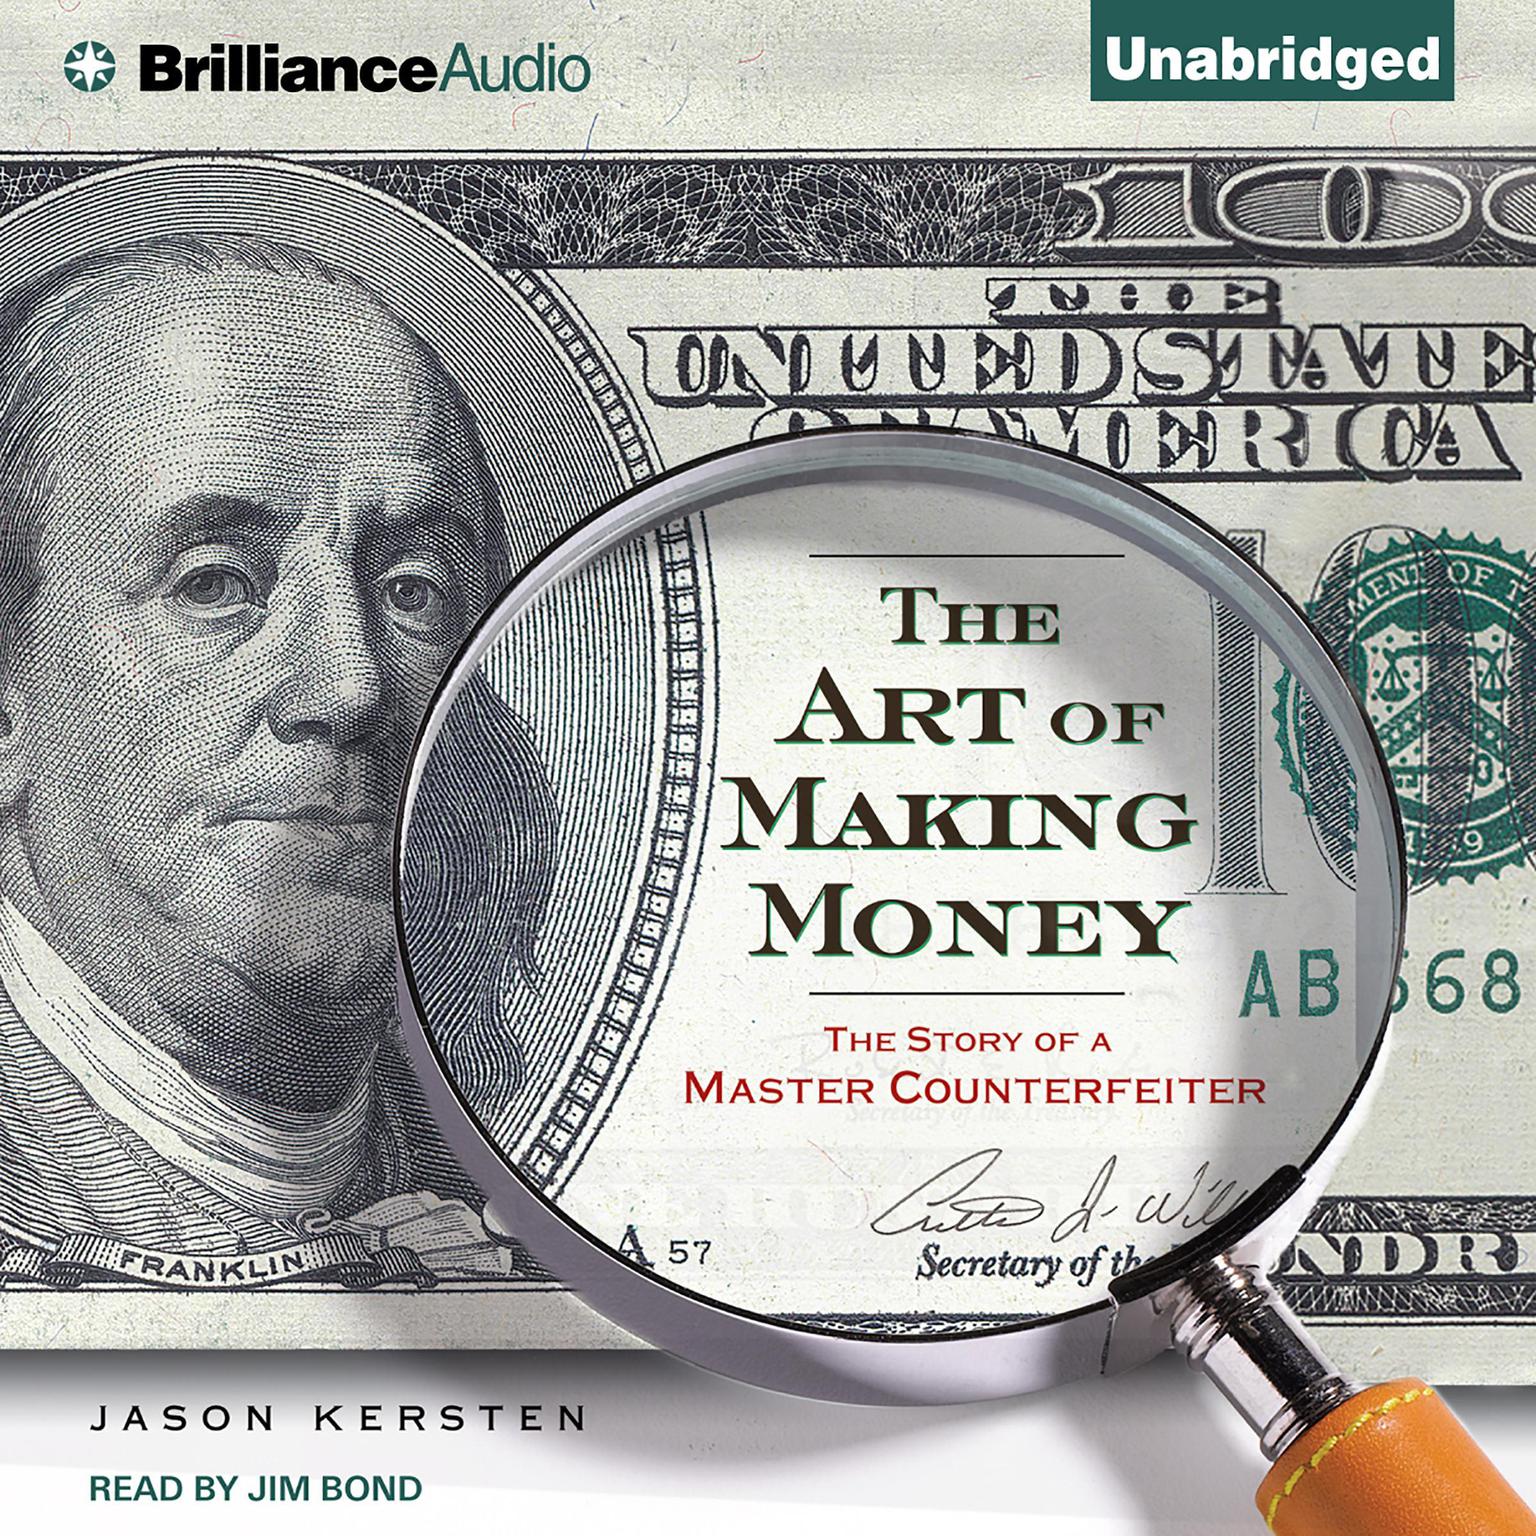 The Art of Making Money: The Story of a Master Counterfeiter Audiobook, by Jason Kersten